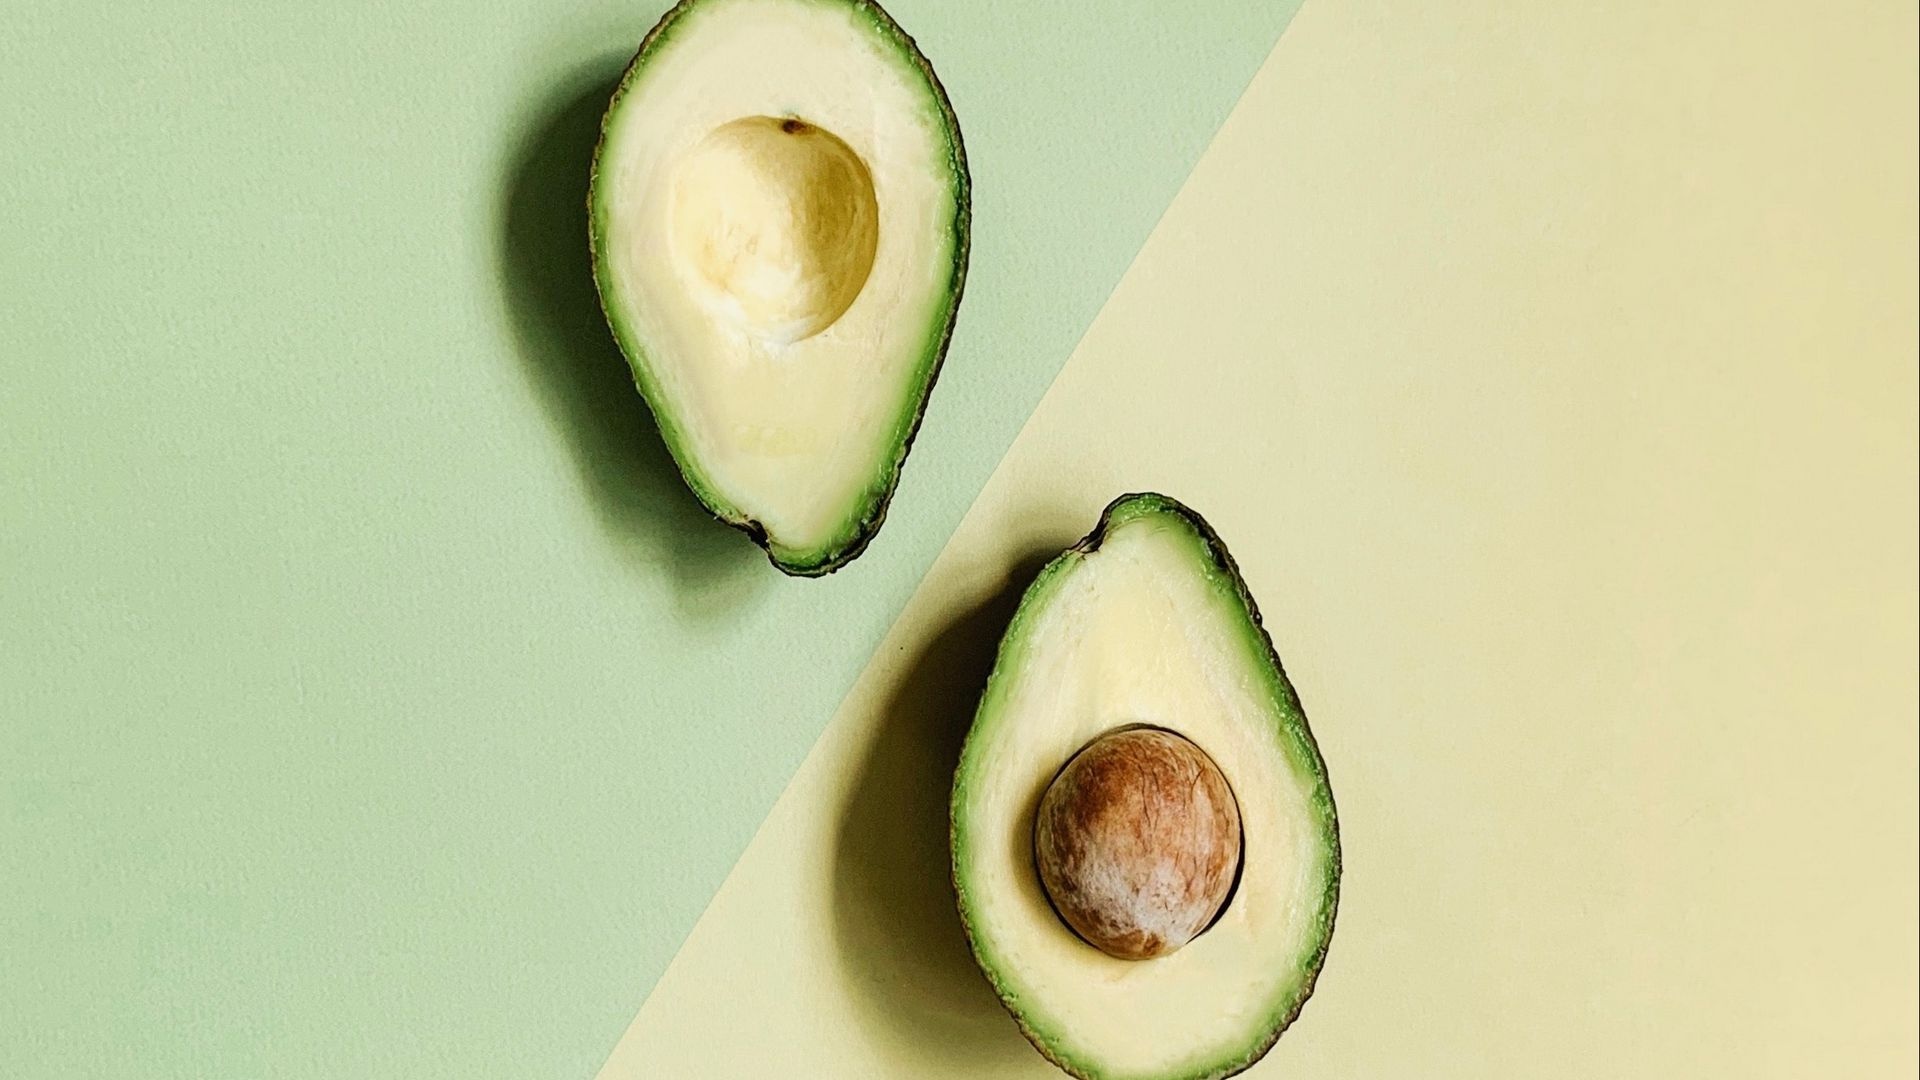 Avocado: Native to Mexico and Central America, Staple food. 1920x1080 Full HD Background.